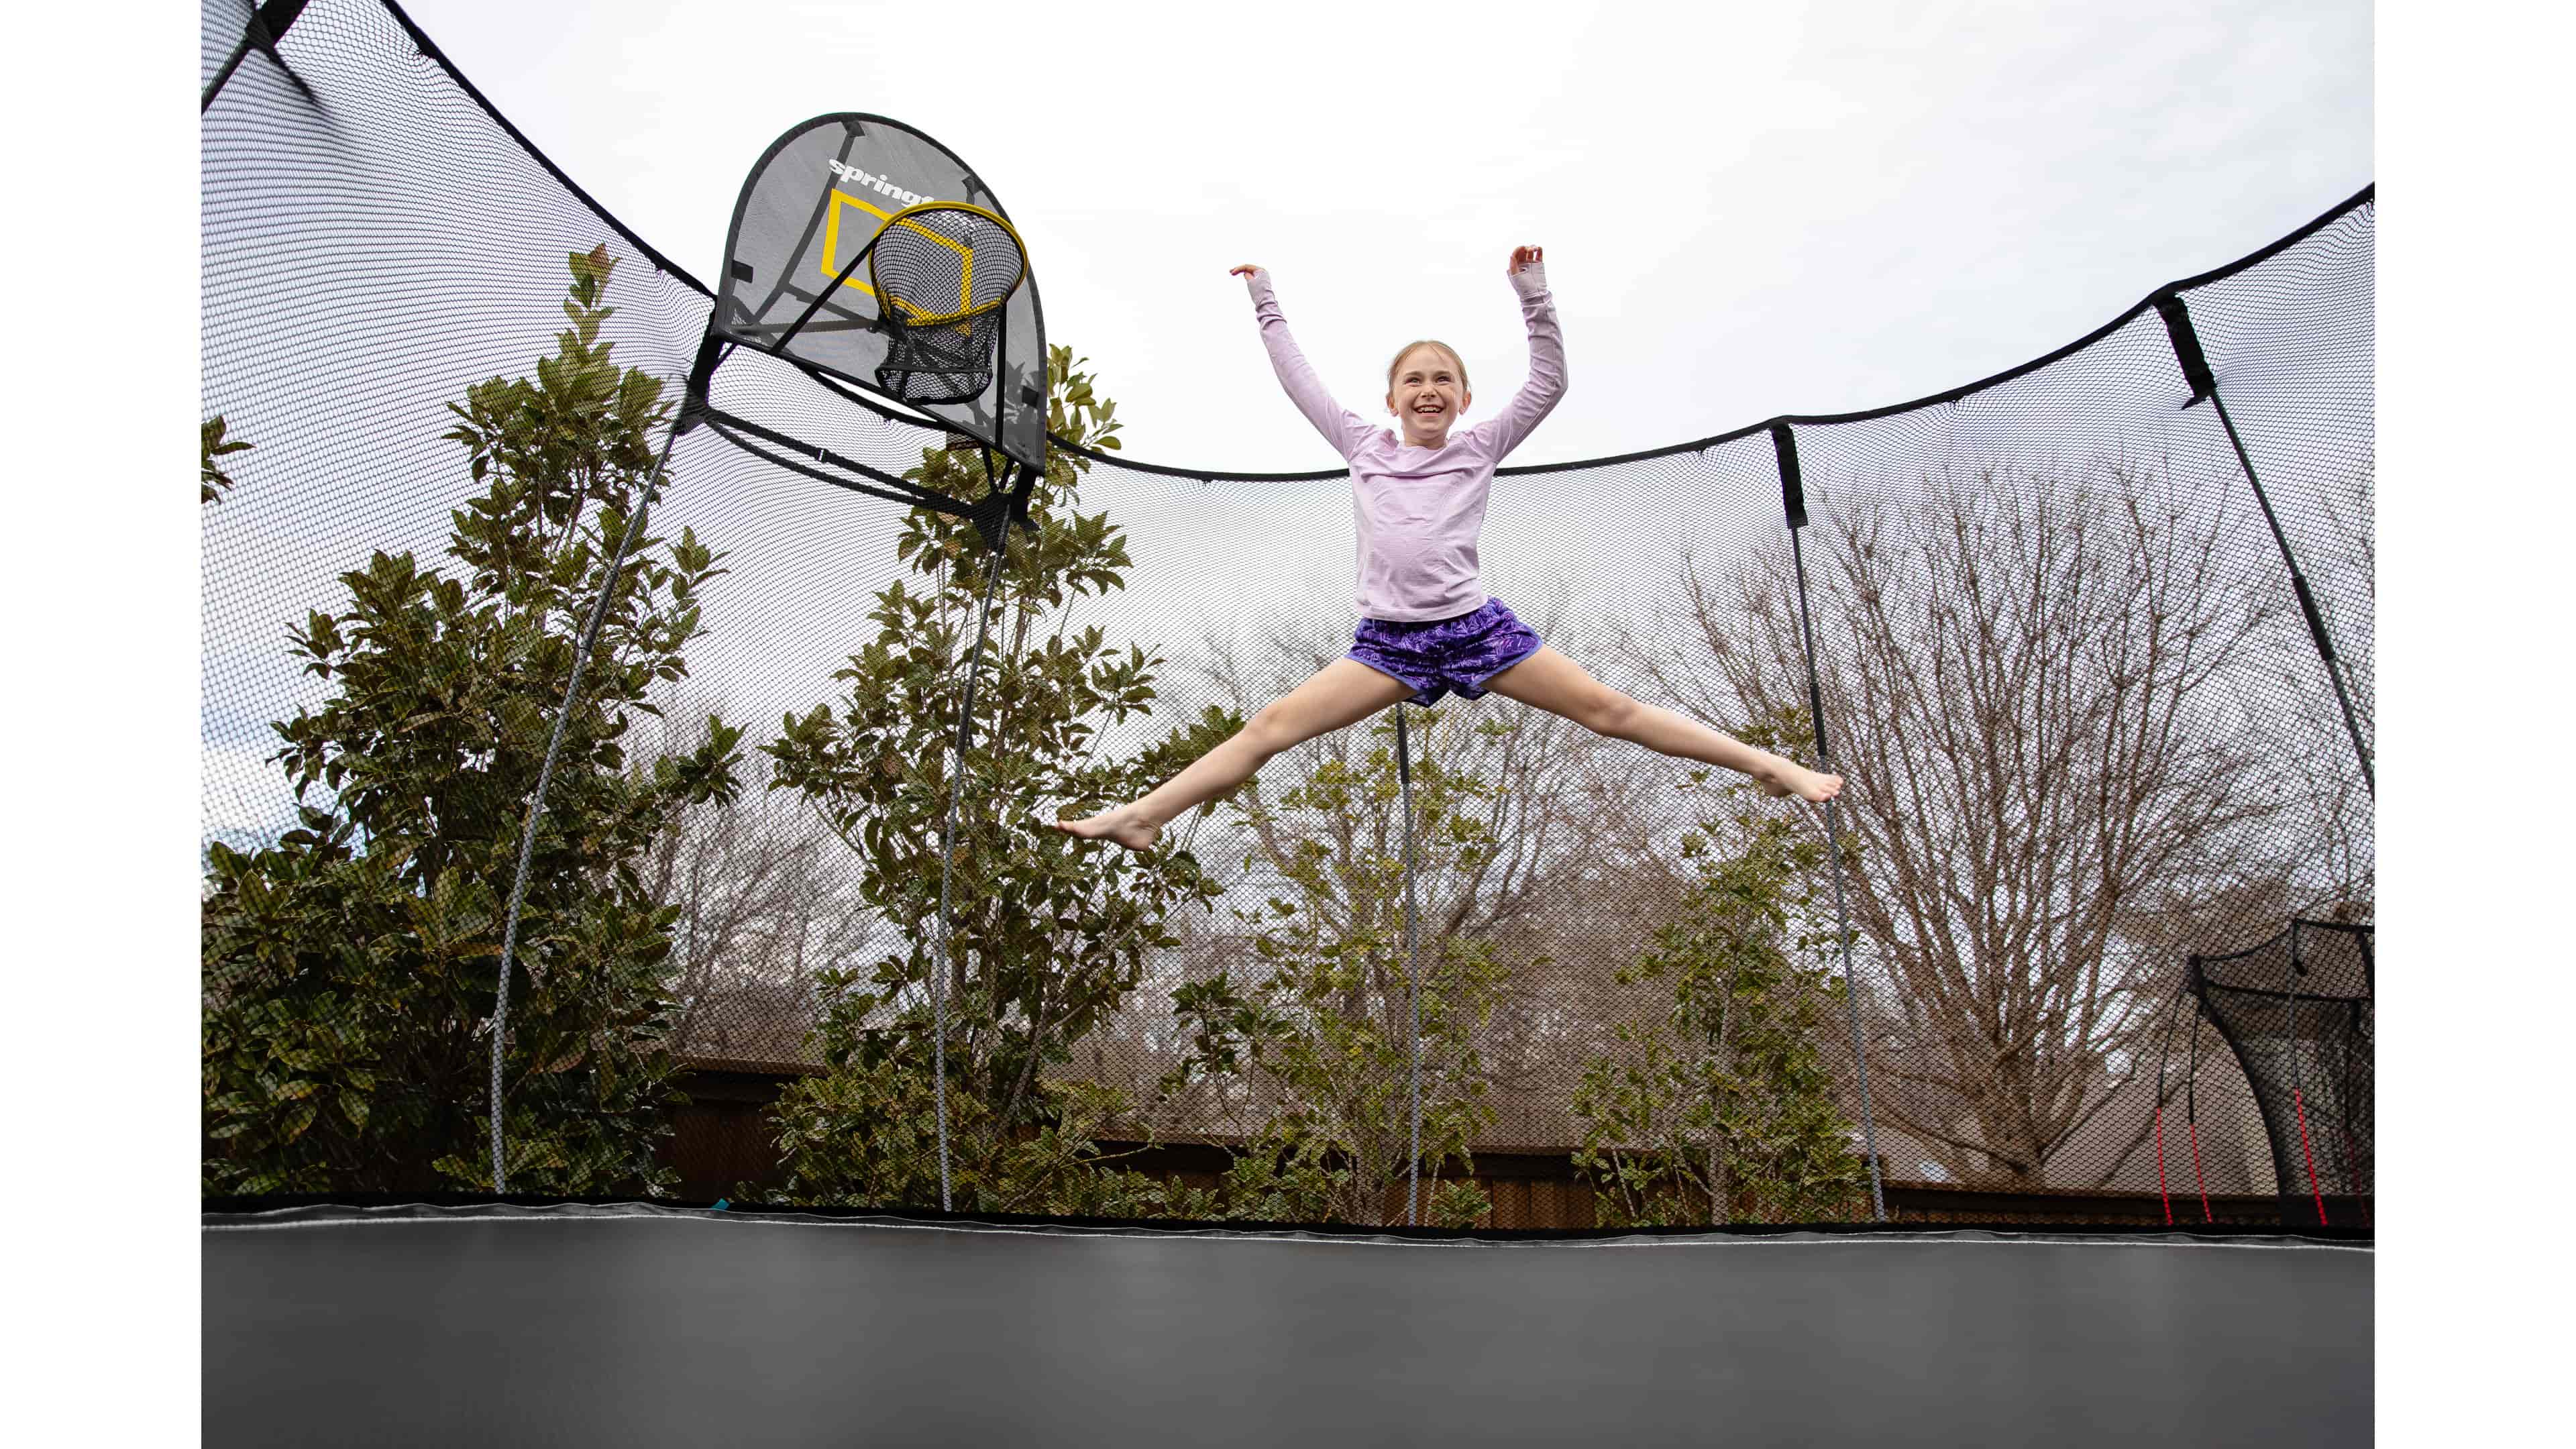 How to Convince Your Parents to Get a Trampoline (Guaranteed!)